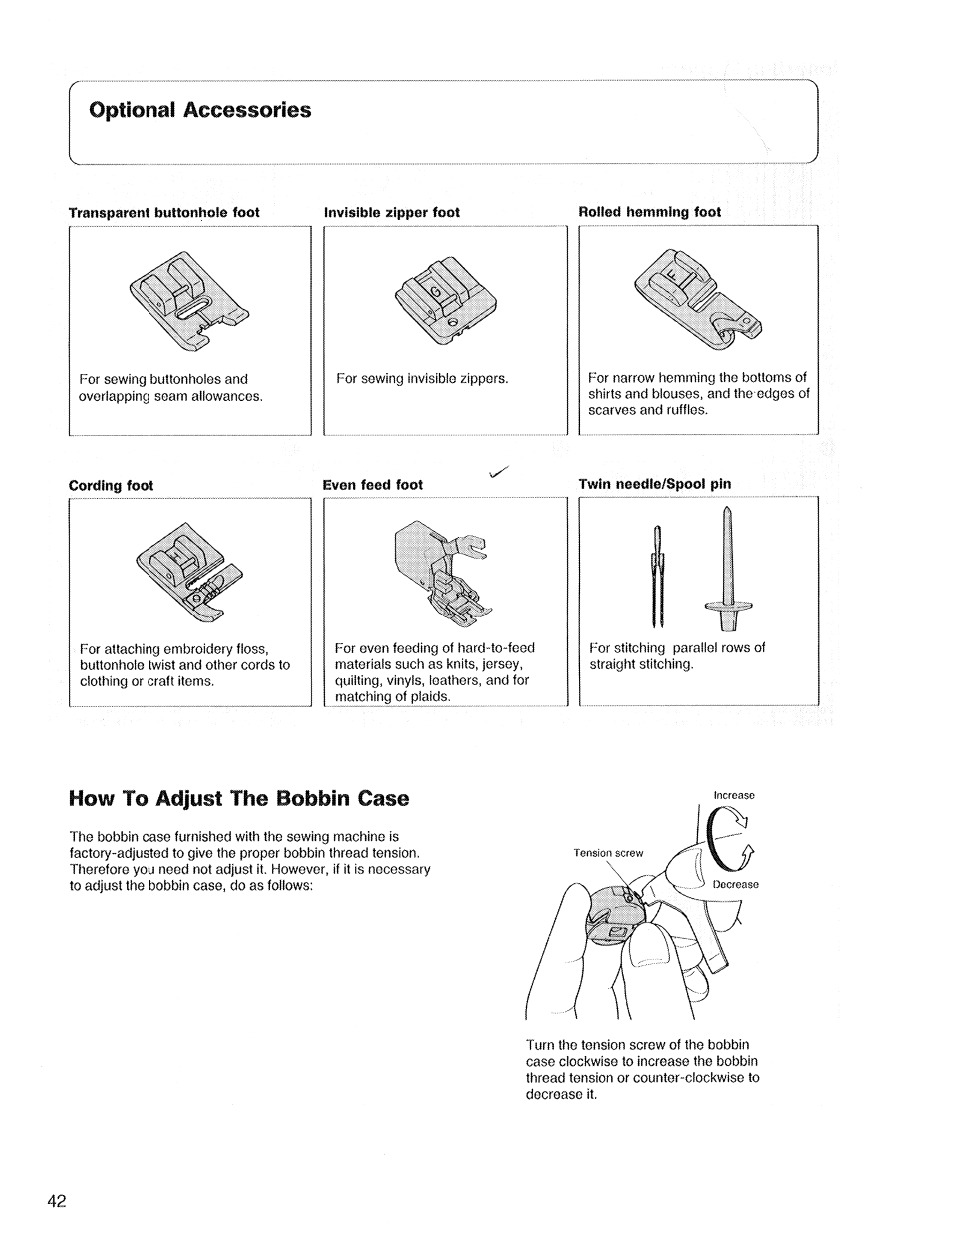 Optional accessories, Cording foot, Even feed foot | Twin needle/spooi pin, How to adjust the bobbin case, Optional accessories how to adjust the bobbin case | SINGER XL1 Quantum User Manual | Page 44 / 48